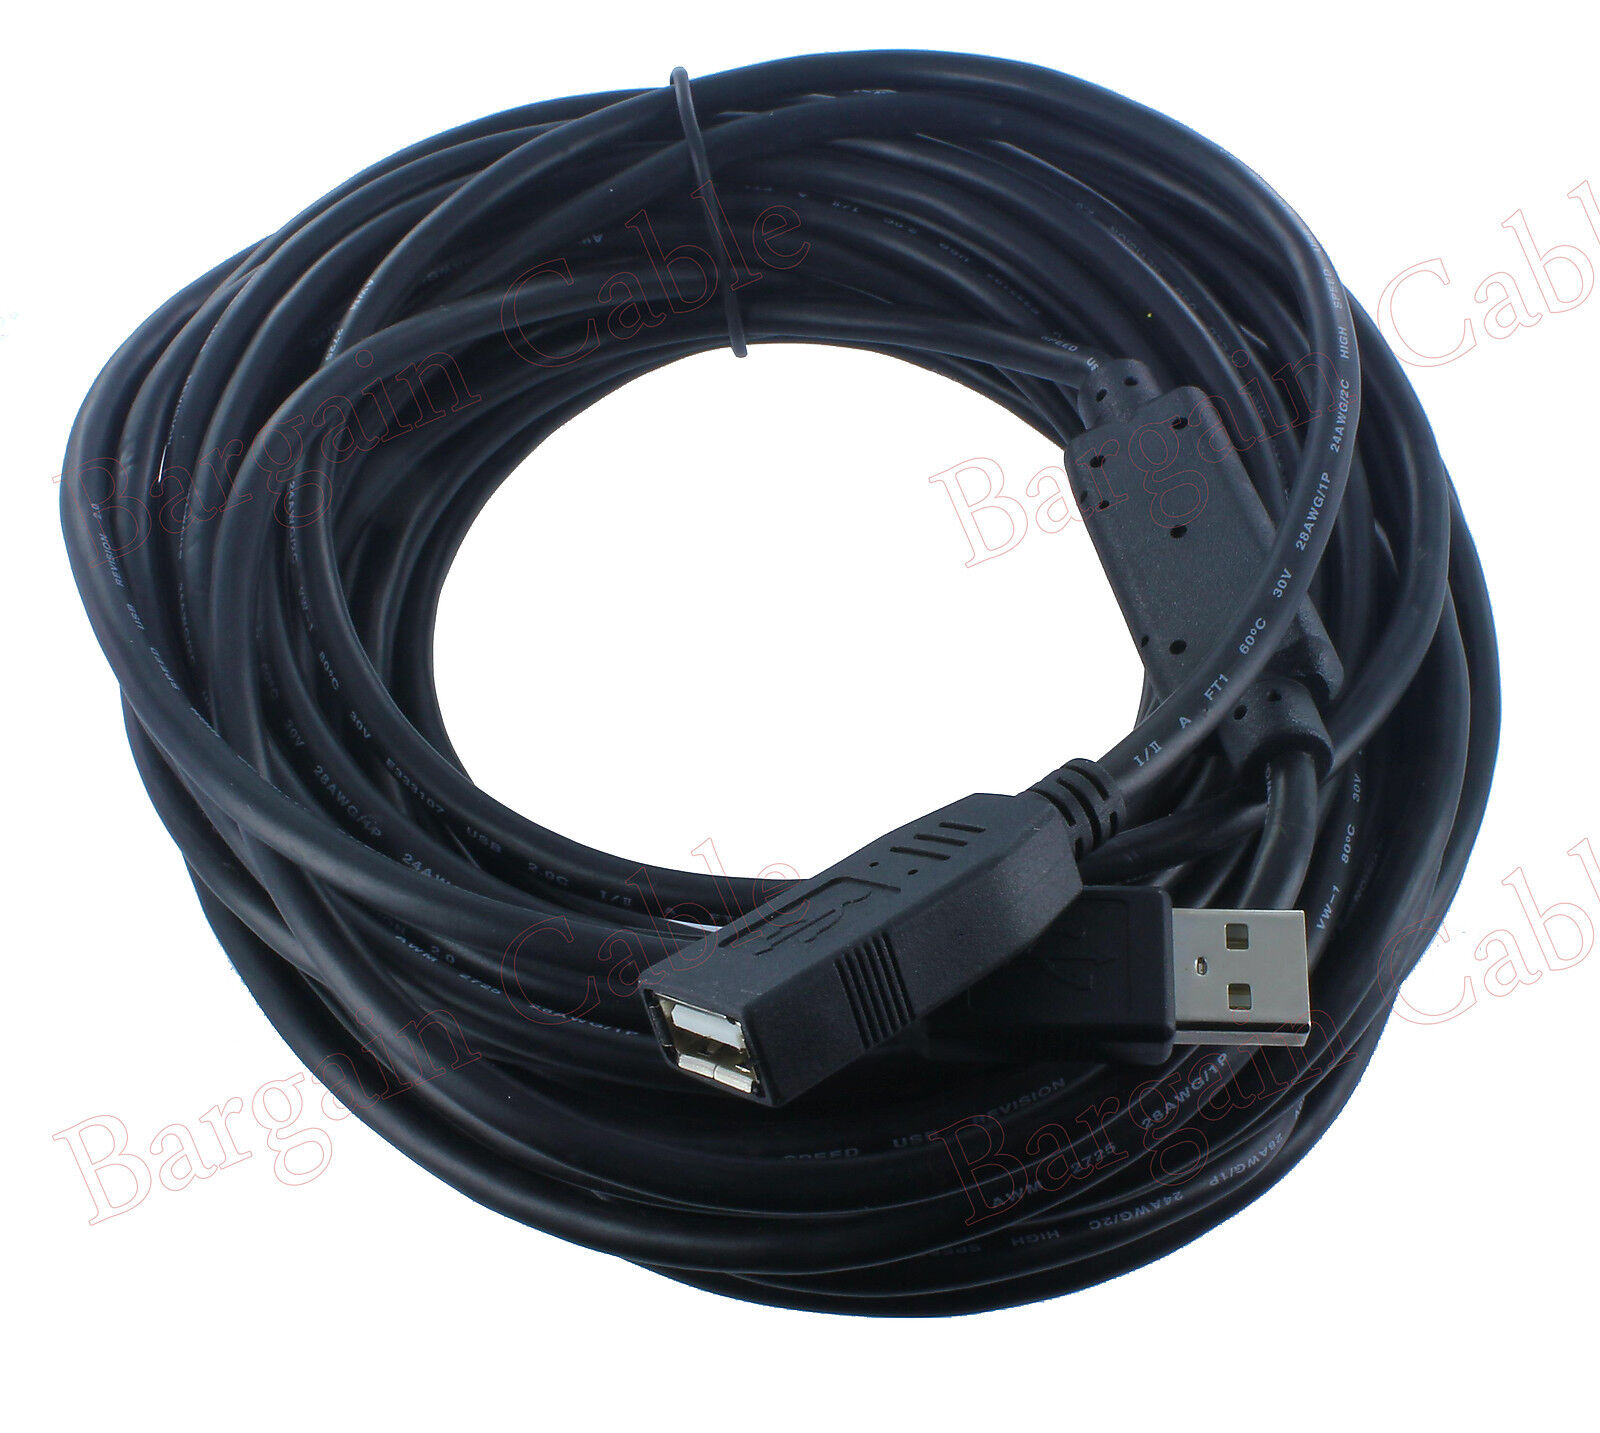 50 FT Hi-Speed 480Mbp USB 2.0 Extension Cable with Active Repeater(U2A1-A2-50)